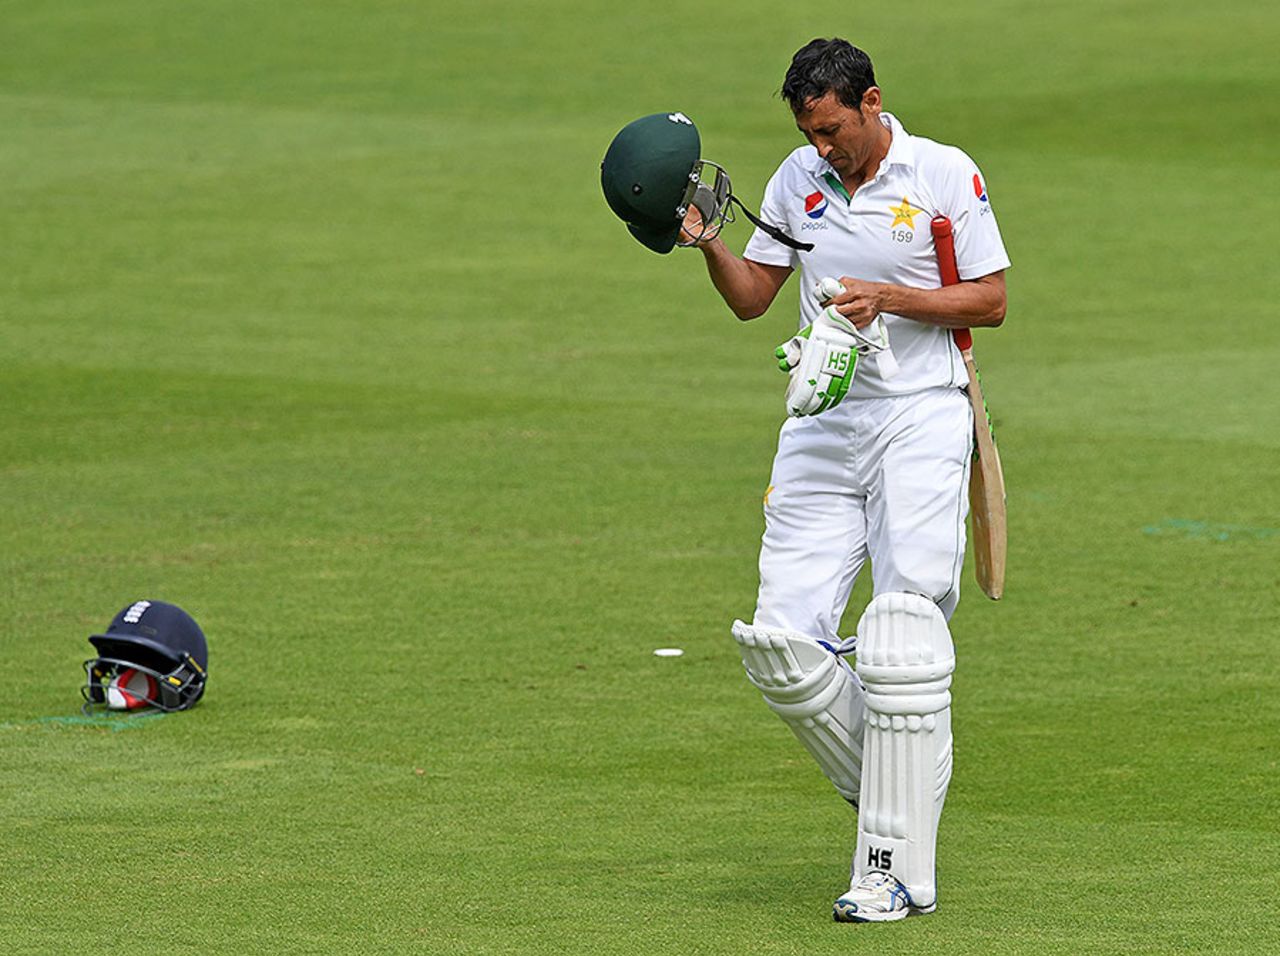 Younis Khan trudges off after falling for 31, England v Pakistan, 3rd Investec Test, Edgbaston, 2nd day, August 5, 2016